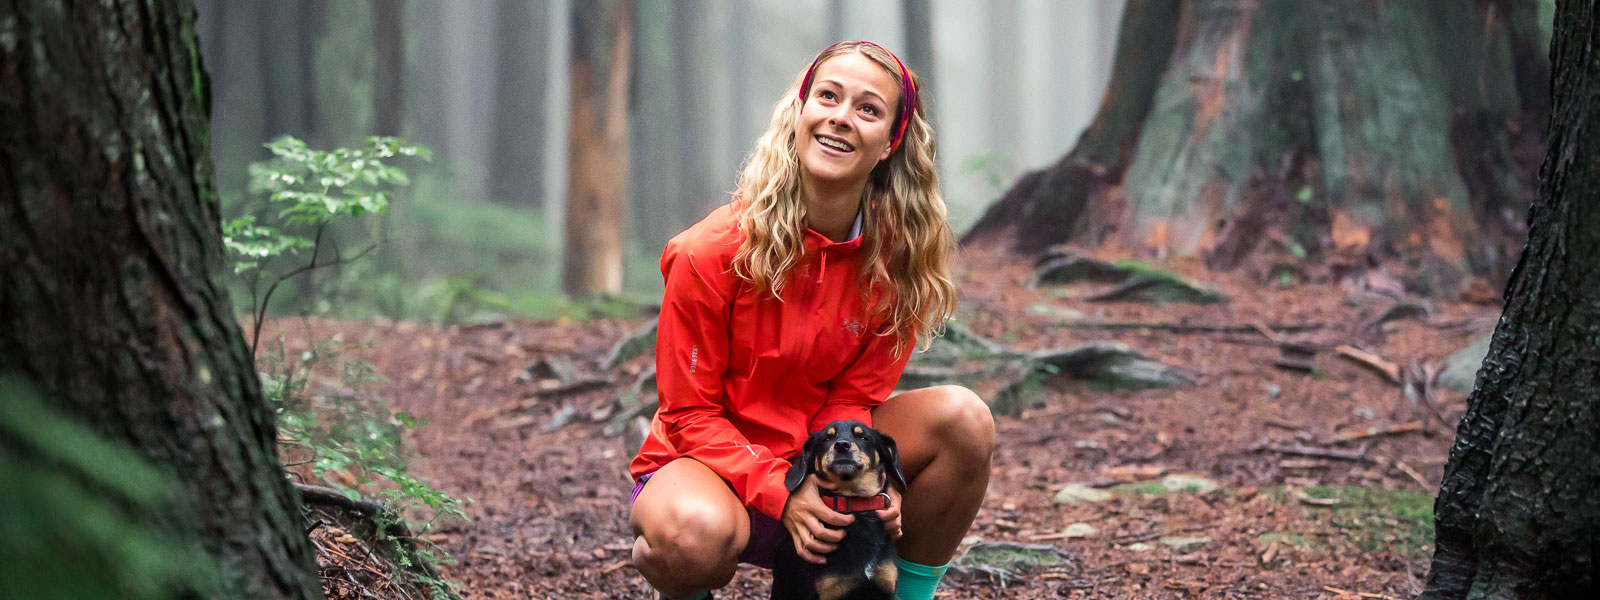 Woman with a red running jacket and headband holds her little dog on a forest path and smiles